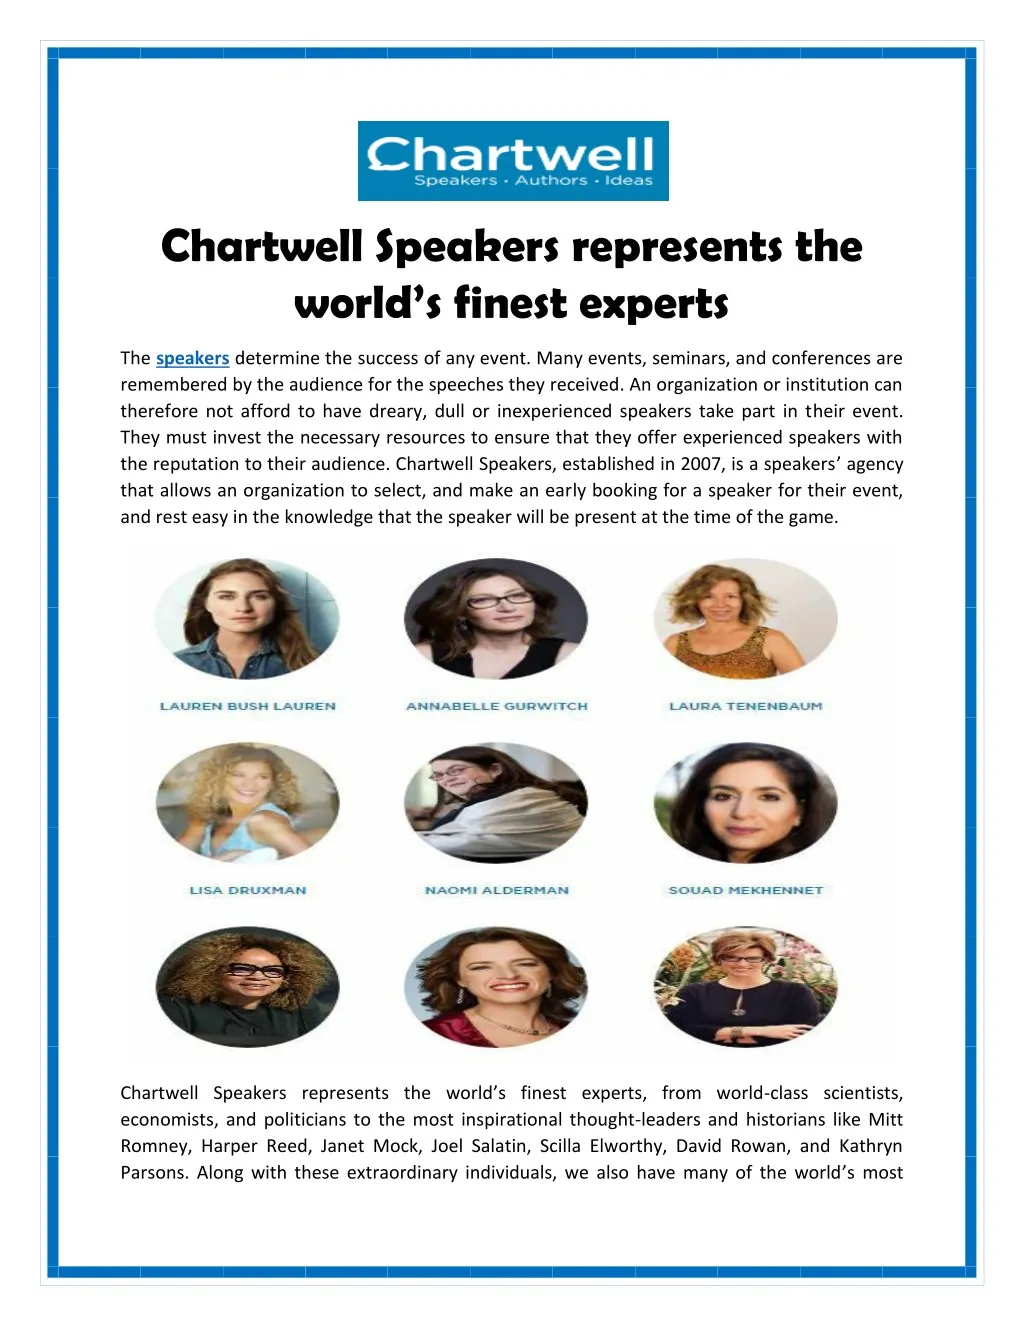 chartwell speakers represents the world s finest